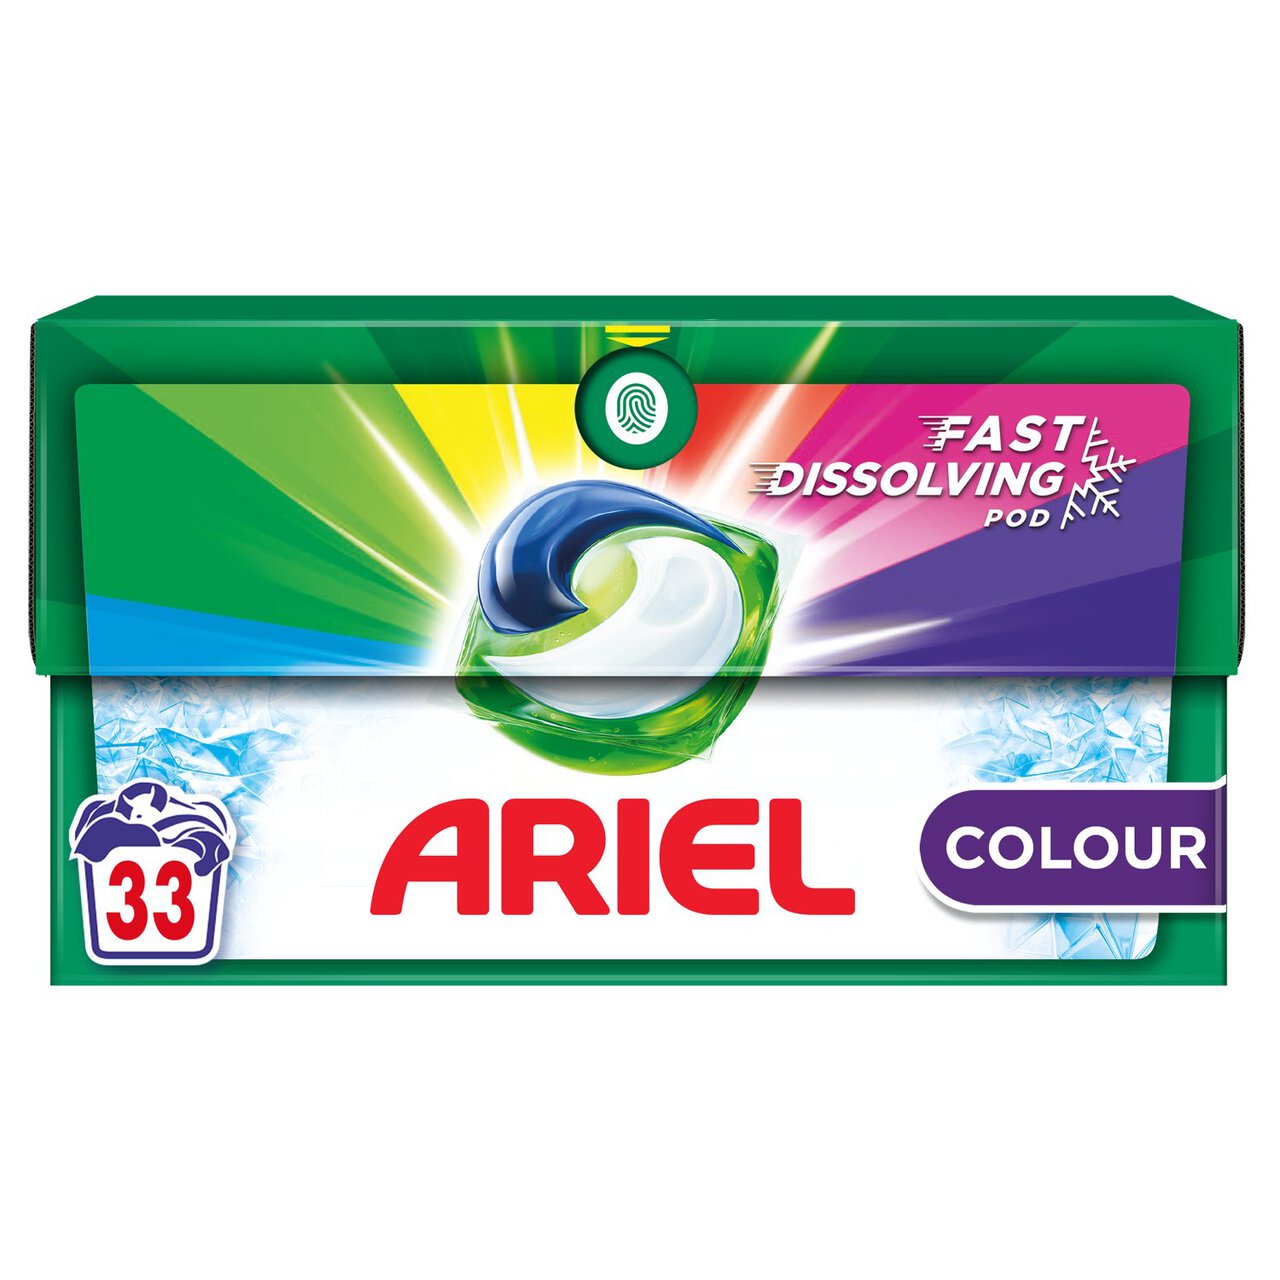 Ariel 3in1 Colour Pods Washing Capsules 33 Washes 33 per pack